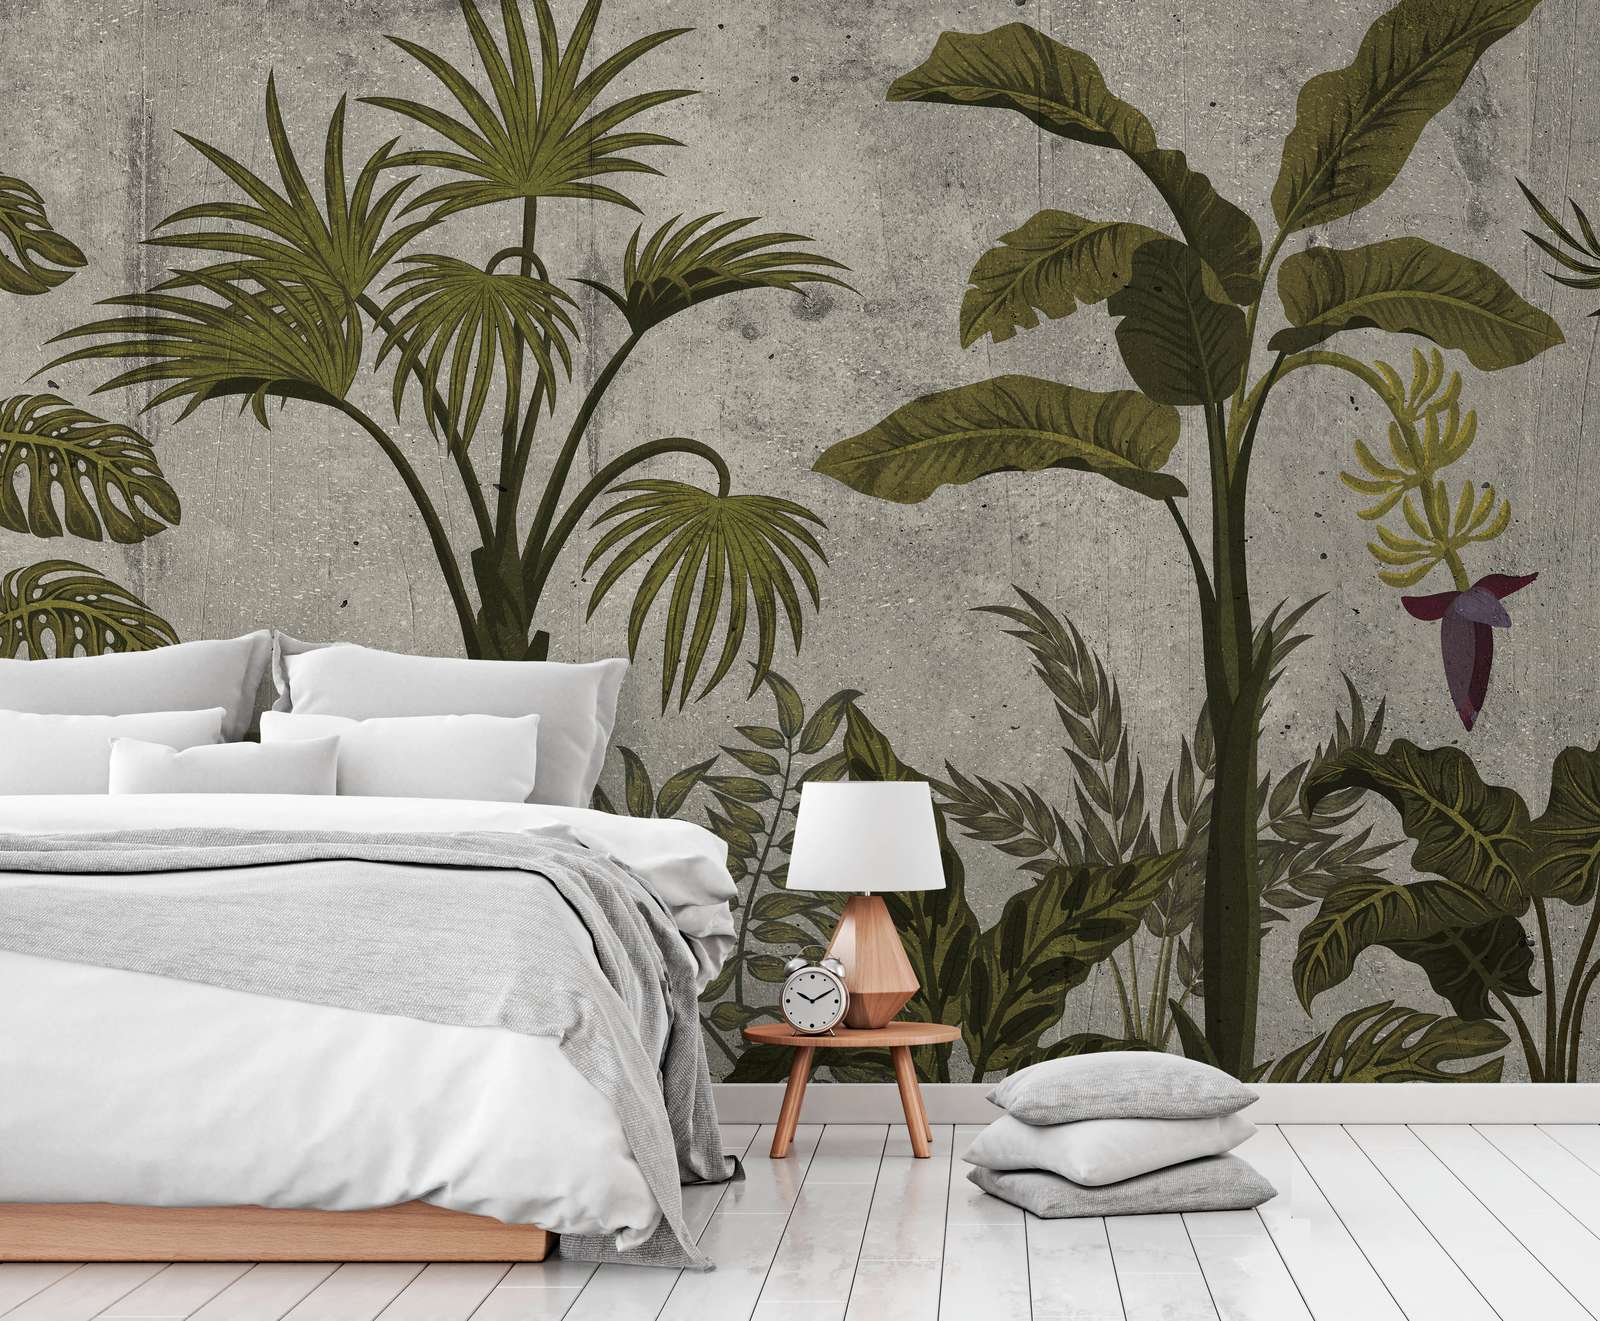             Photo wallpaper with tropical landscape on concrete look - green, grey
        